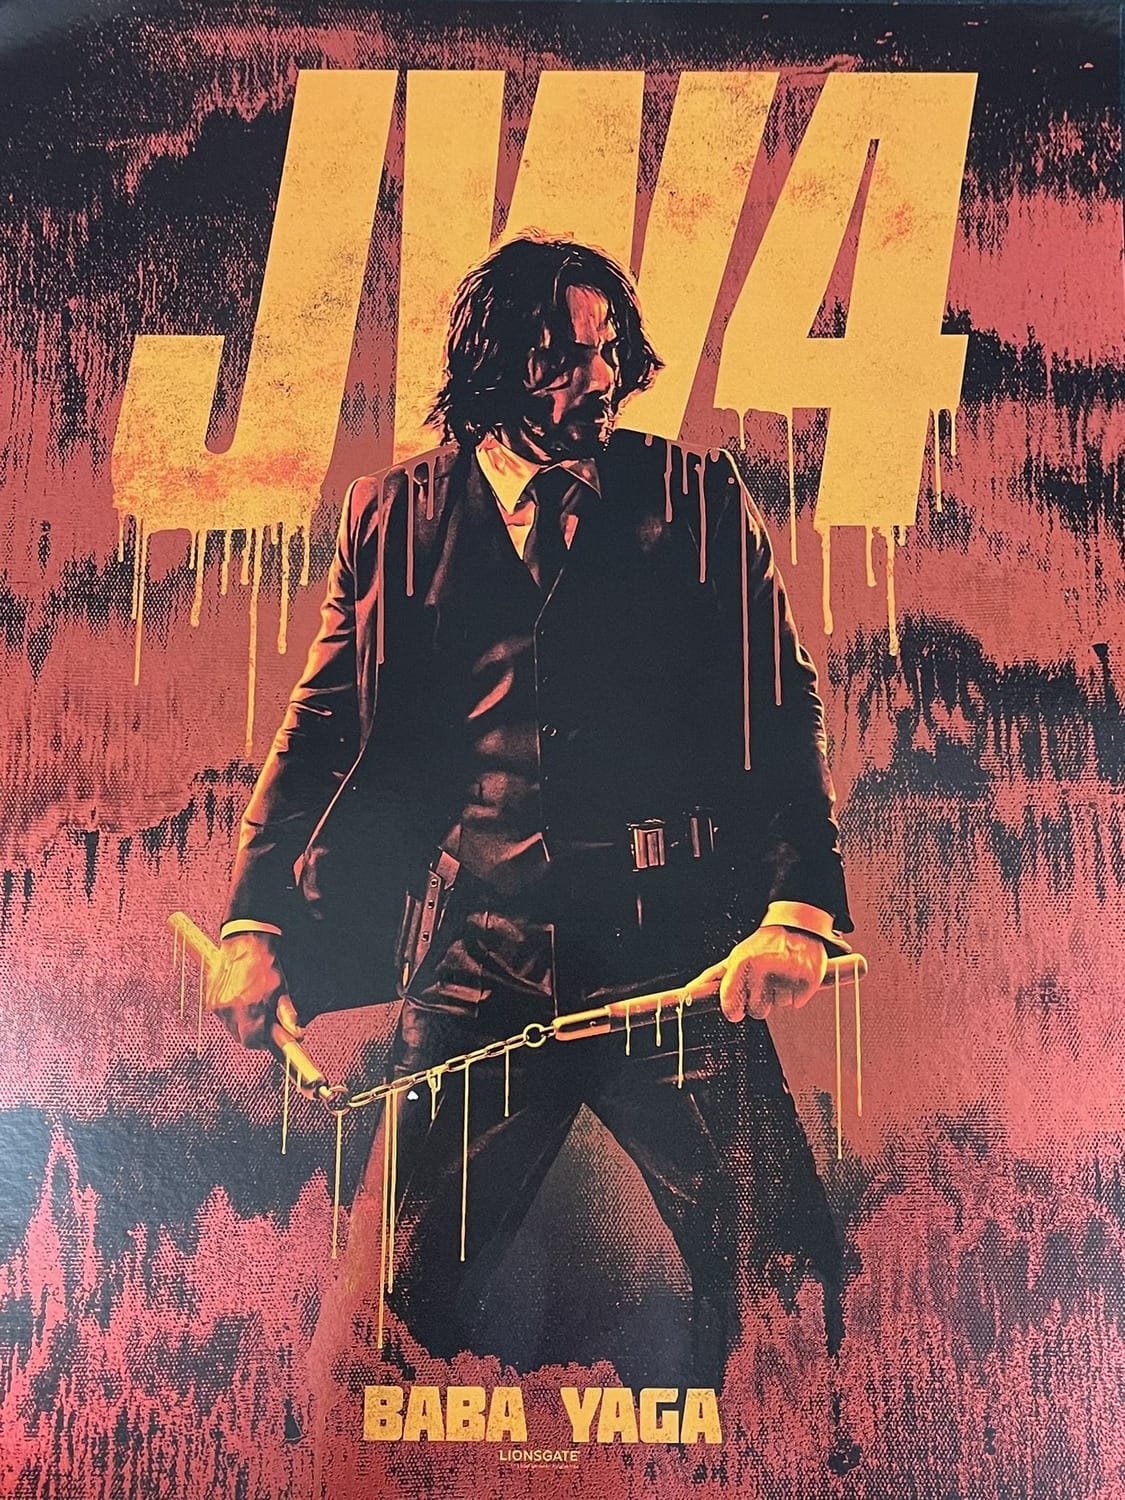 More epic, more scale and more ambition in a sweeping spectacle: ‘John Wick 4’ turns cinematic action into a work of art